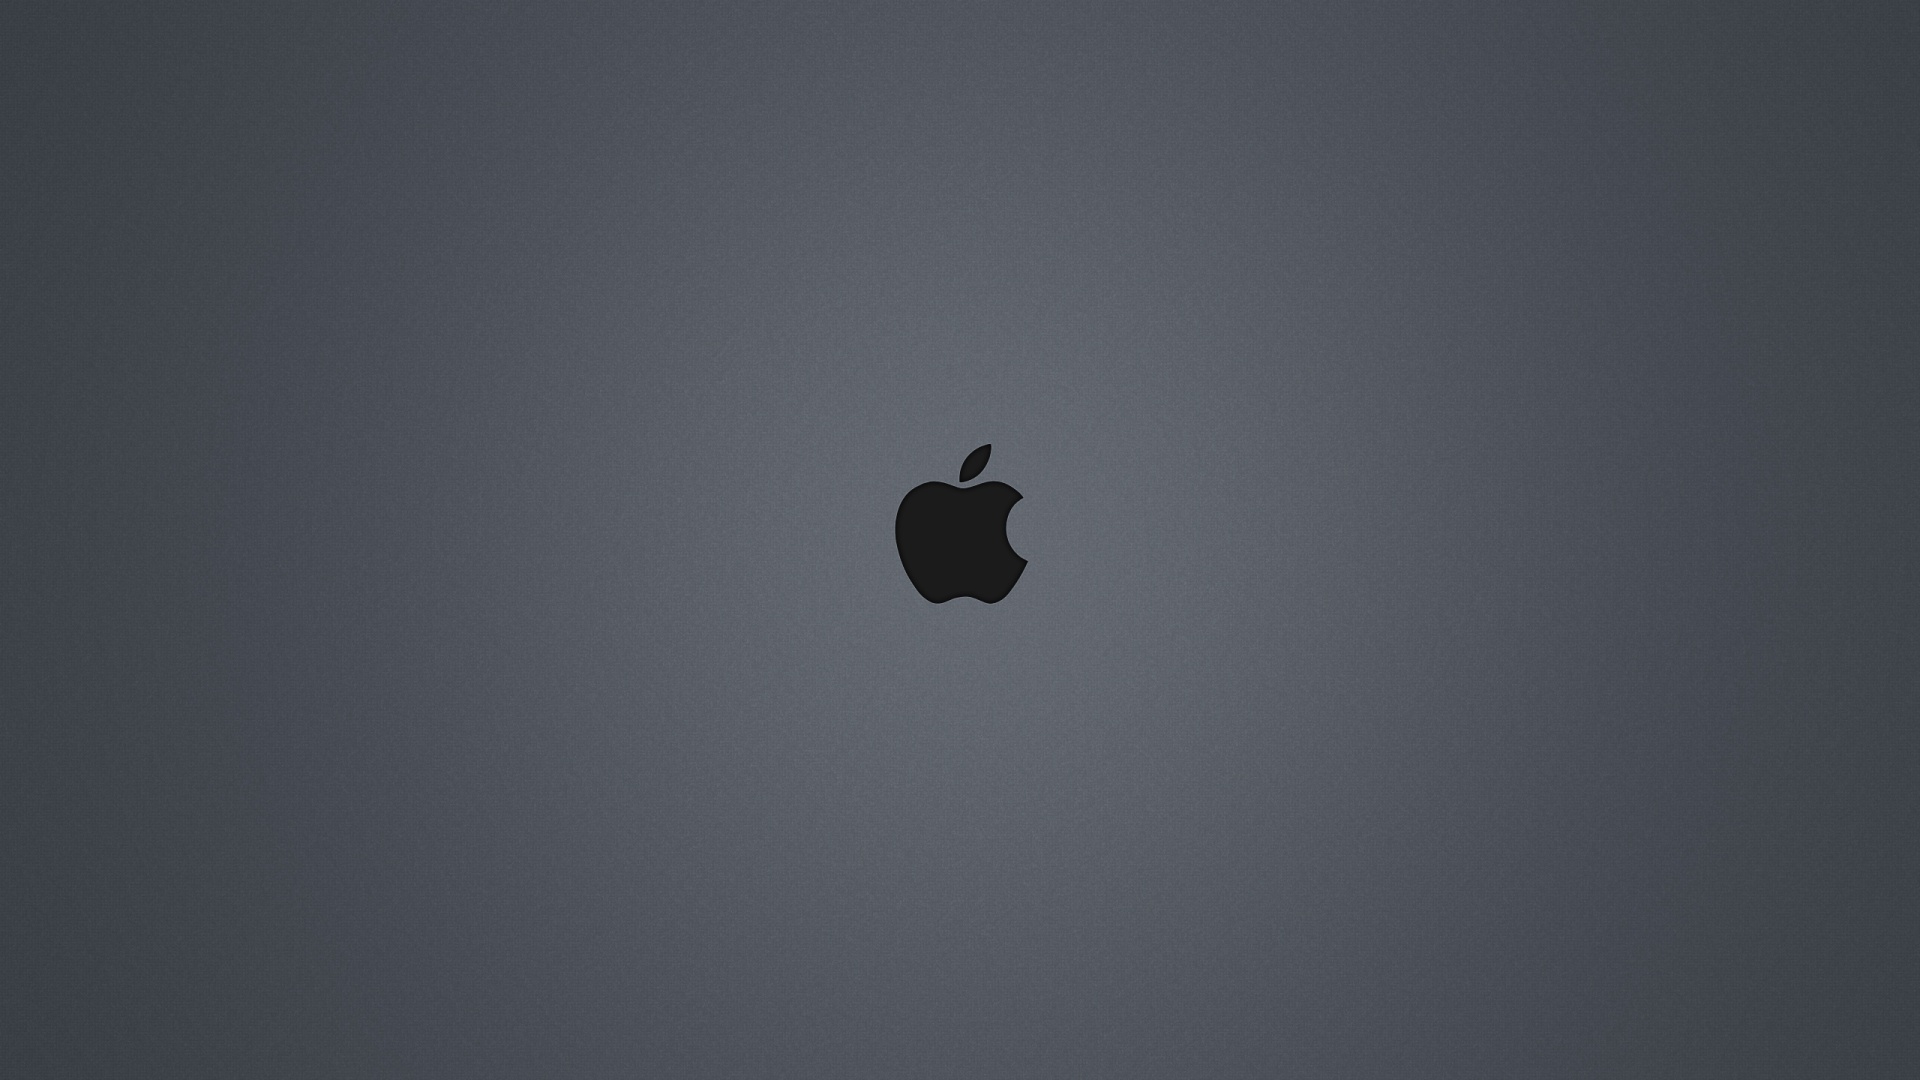 Apple Mac Wallpaper Pc Android iPhone And iPad